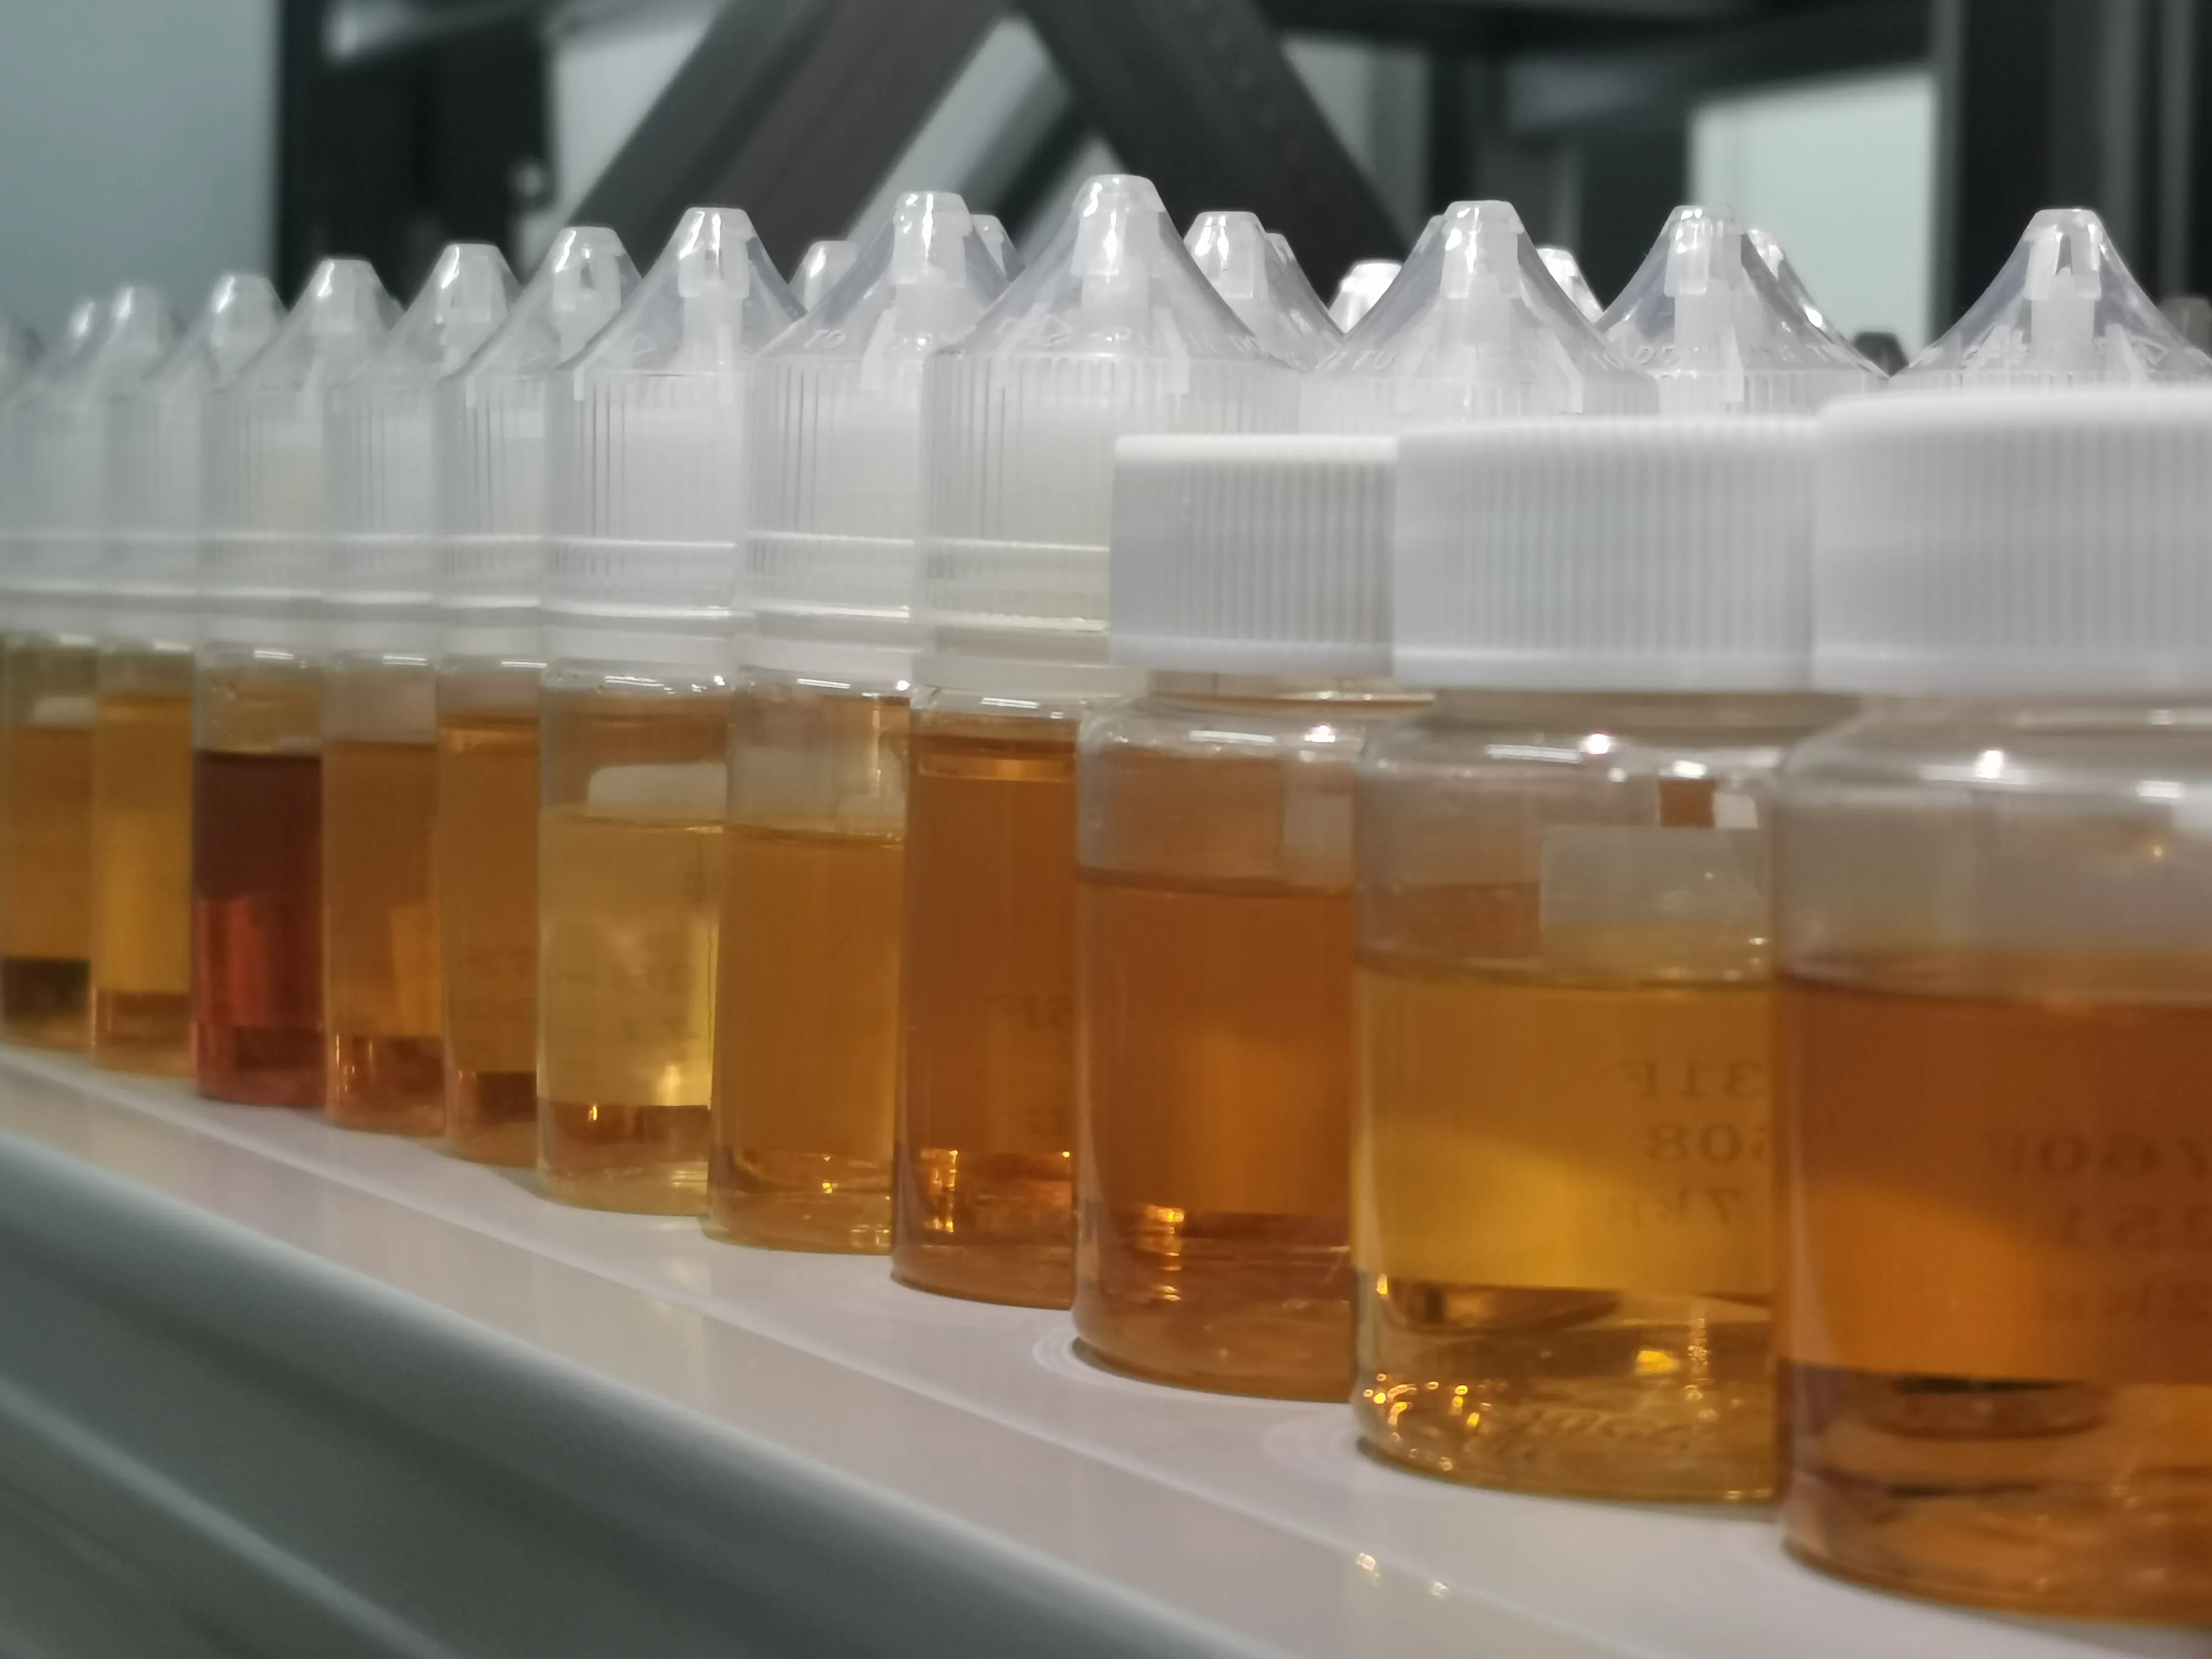 Zinwi - How to test diglyceride ejuice